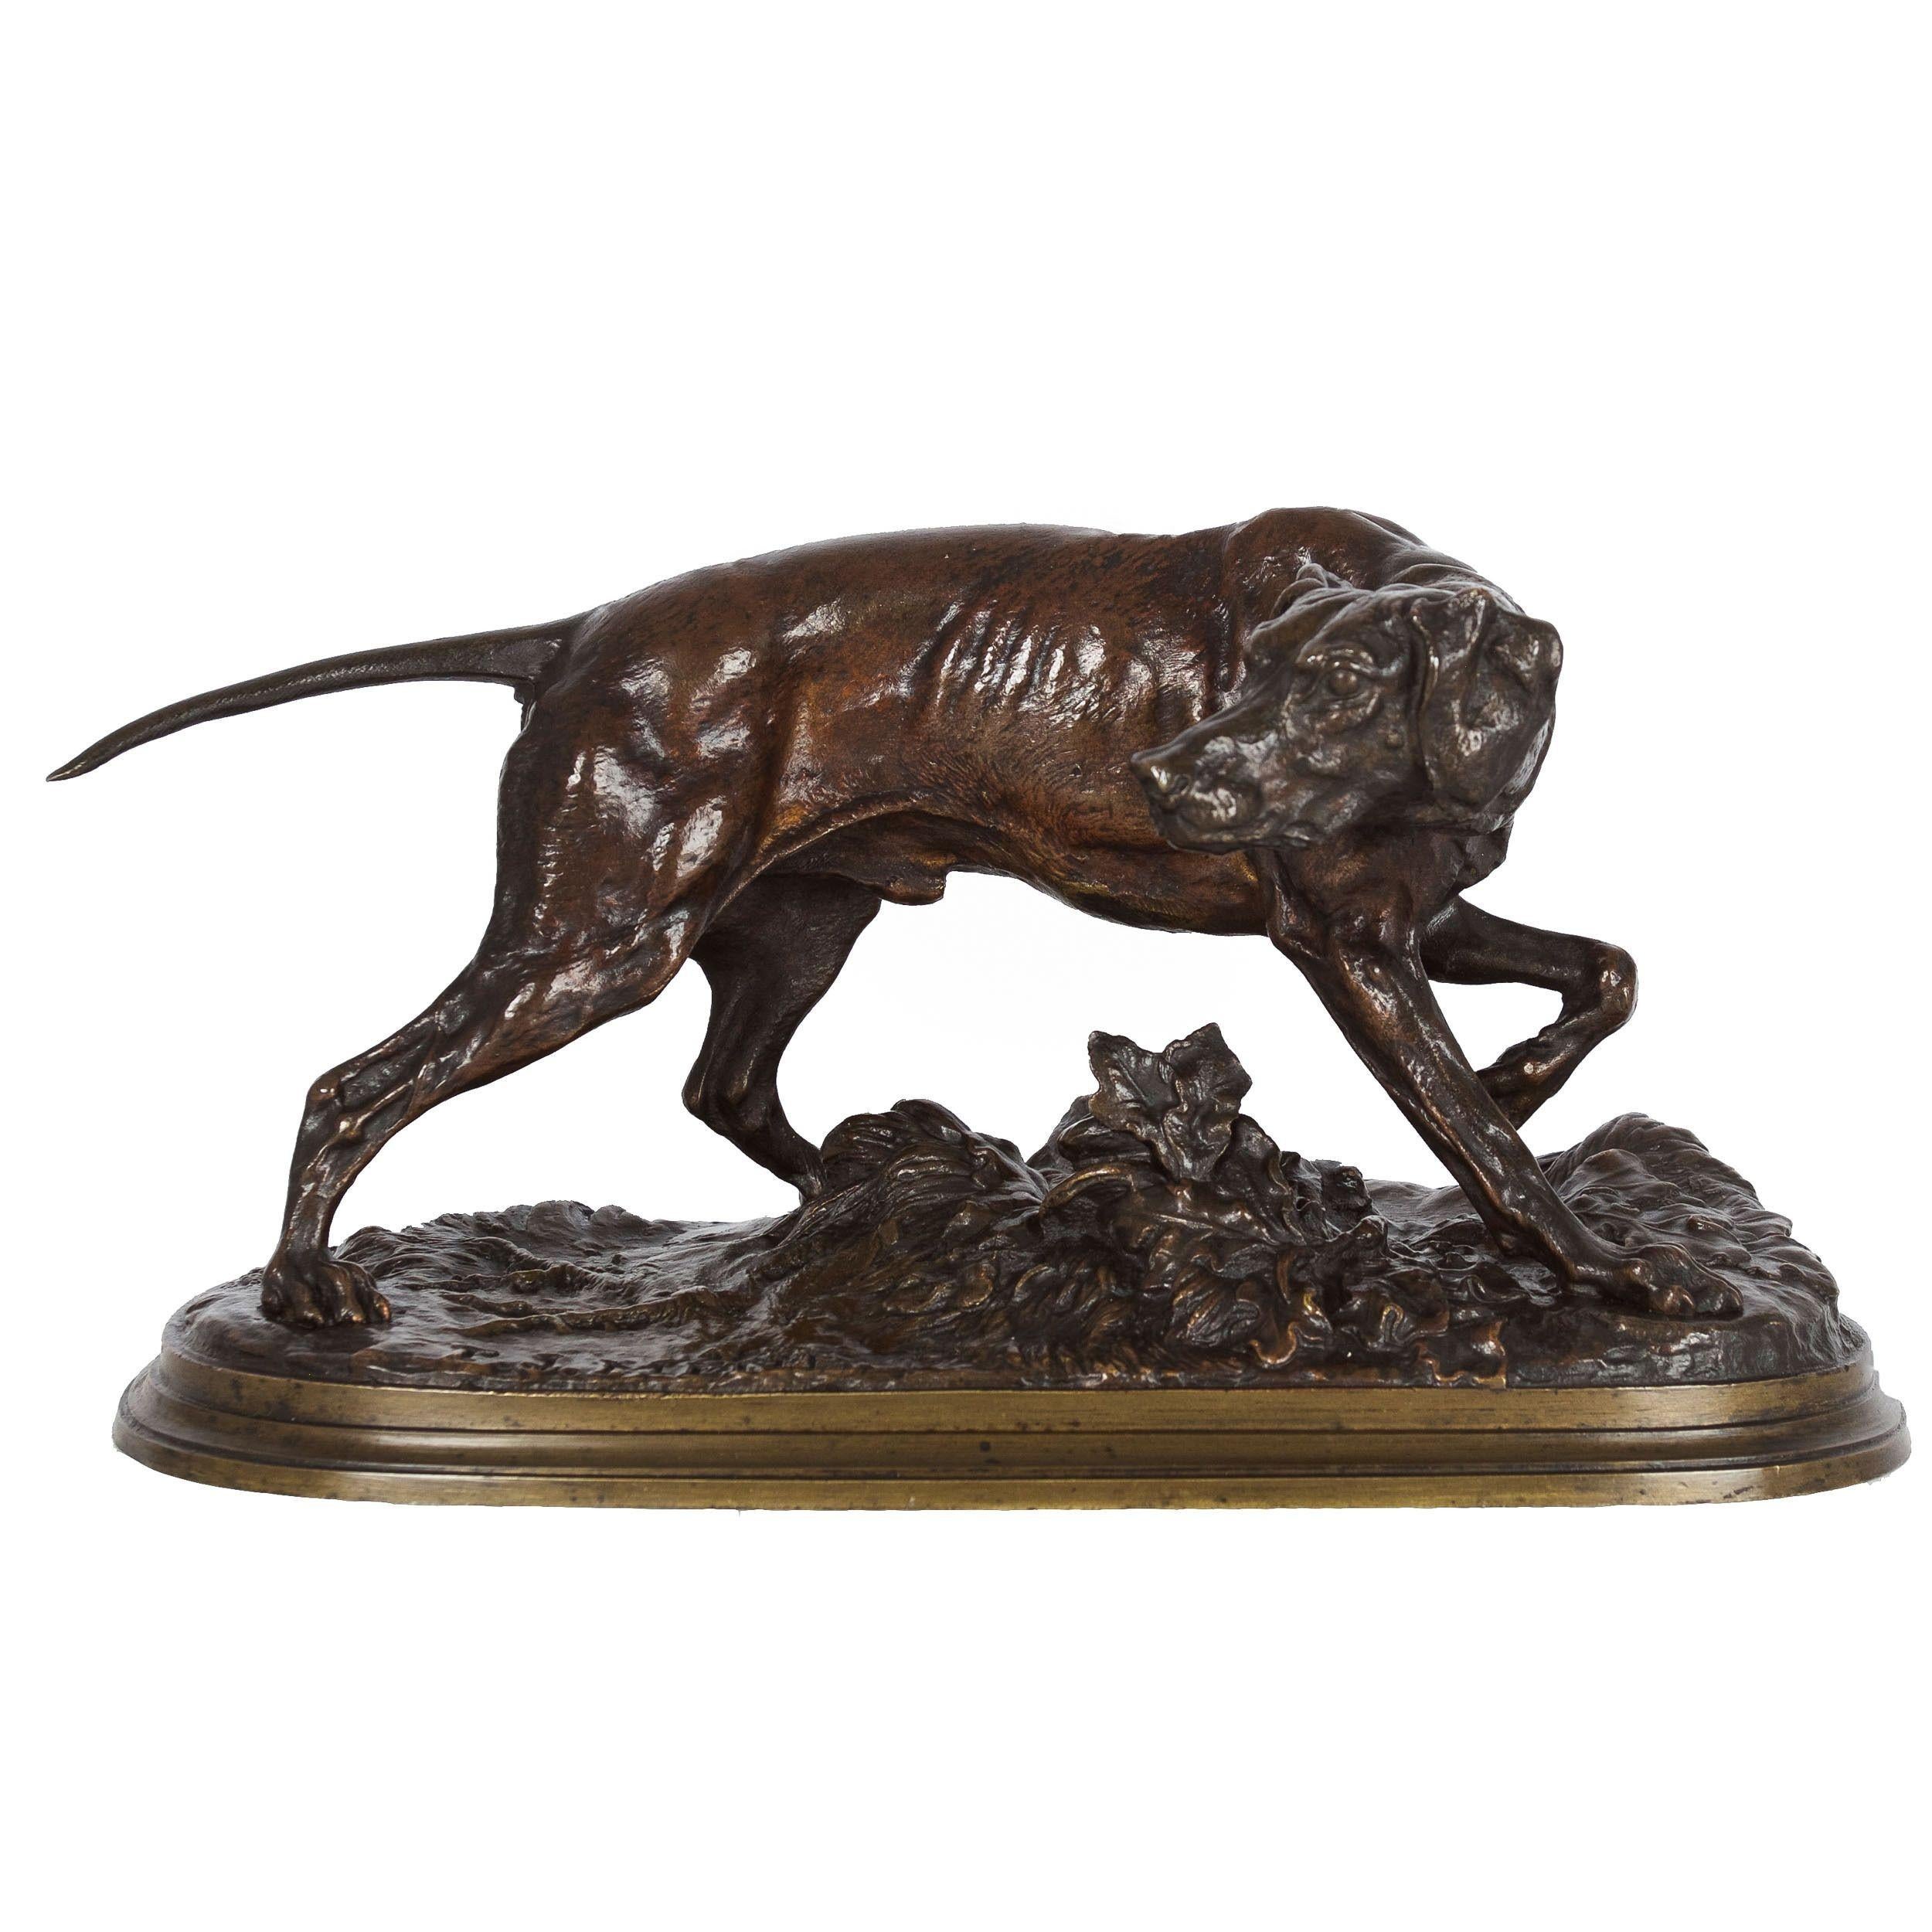 A very good quality sand-cast model of Mêne's Pointer Dog, it features a richly textured surface finished in an overall medium-brown nuanced autumnal patina. A rather early model, probably cast circa 1870, it features exquisite detail in the